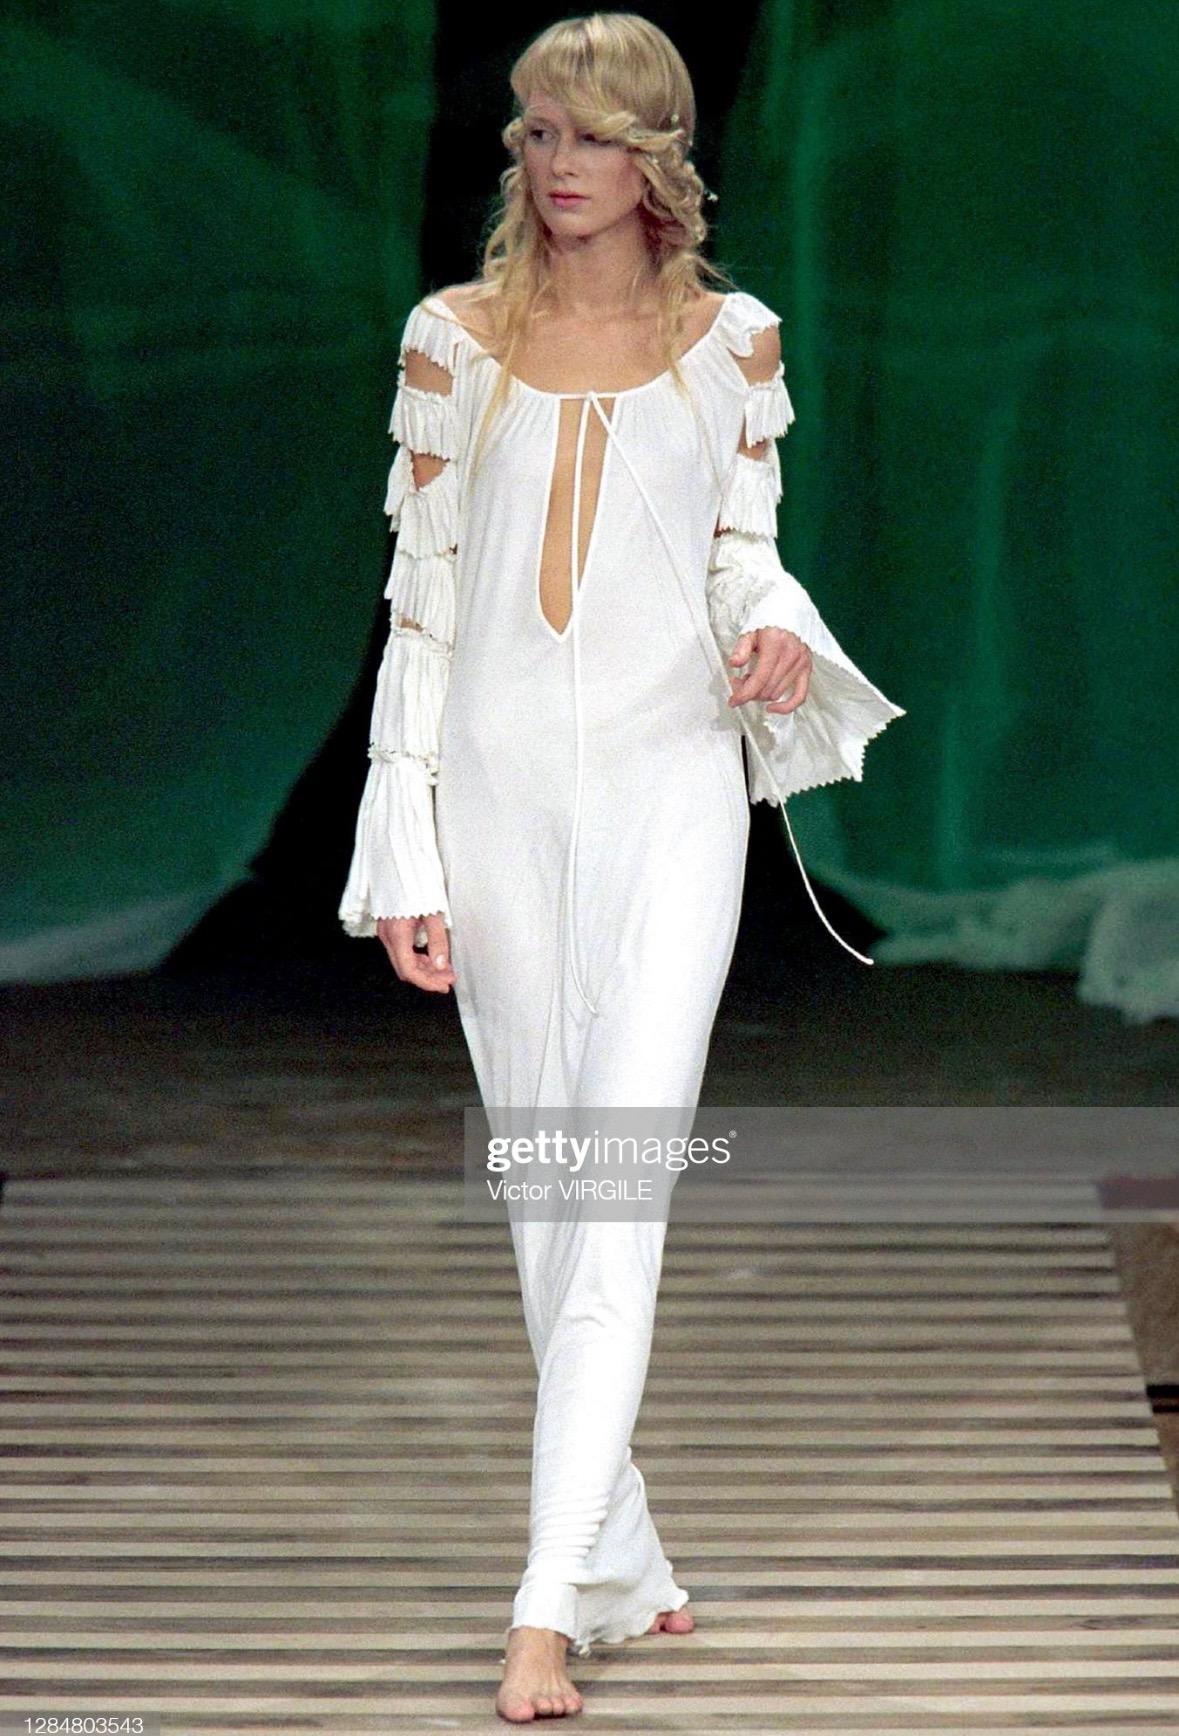 TheRealList presents: a fabulous dark green Jean Paul Gaultier bodycon gown. From the Spring/Summer 2000 collection, this incredible dress debuted on the season's runway in white. Constructed of silky viscose and perfectly falls on the body, the